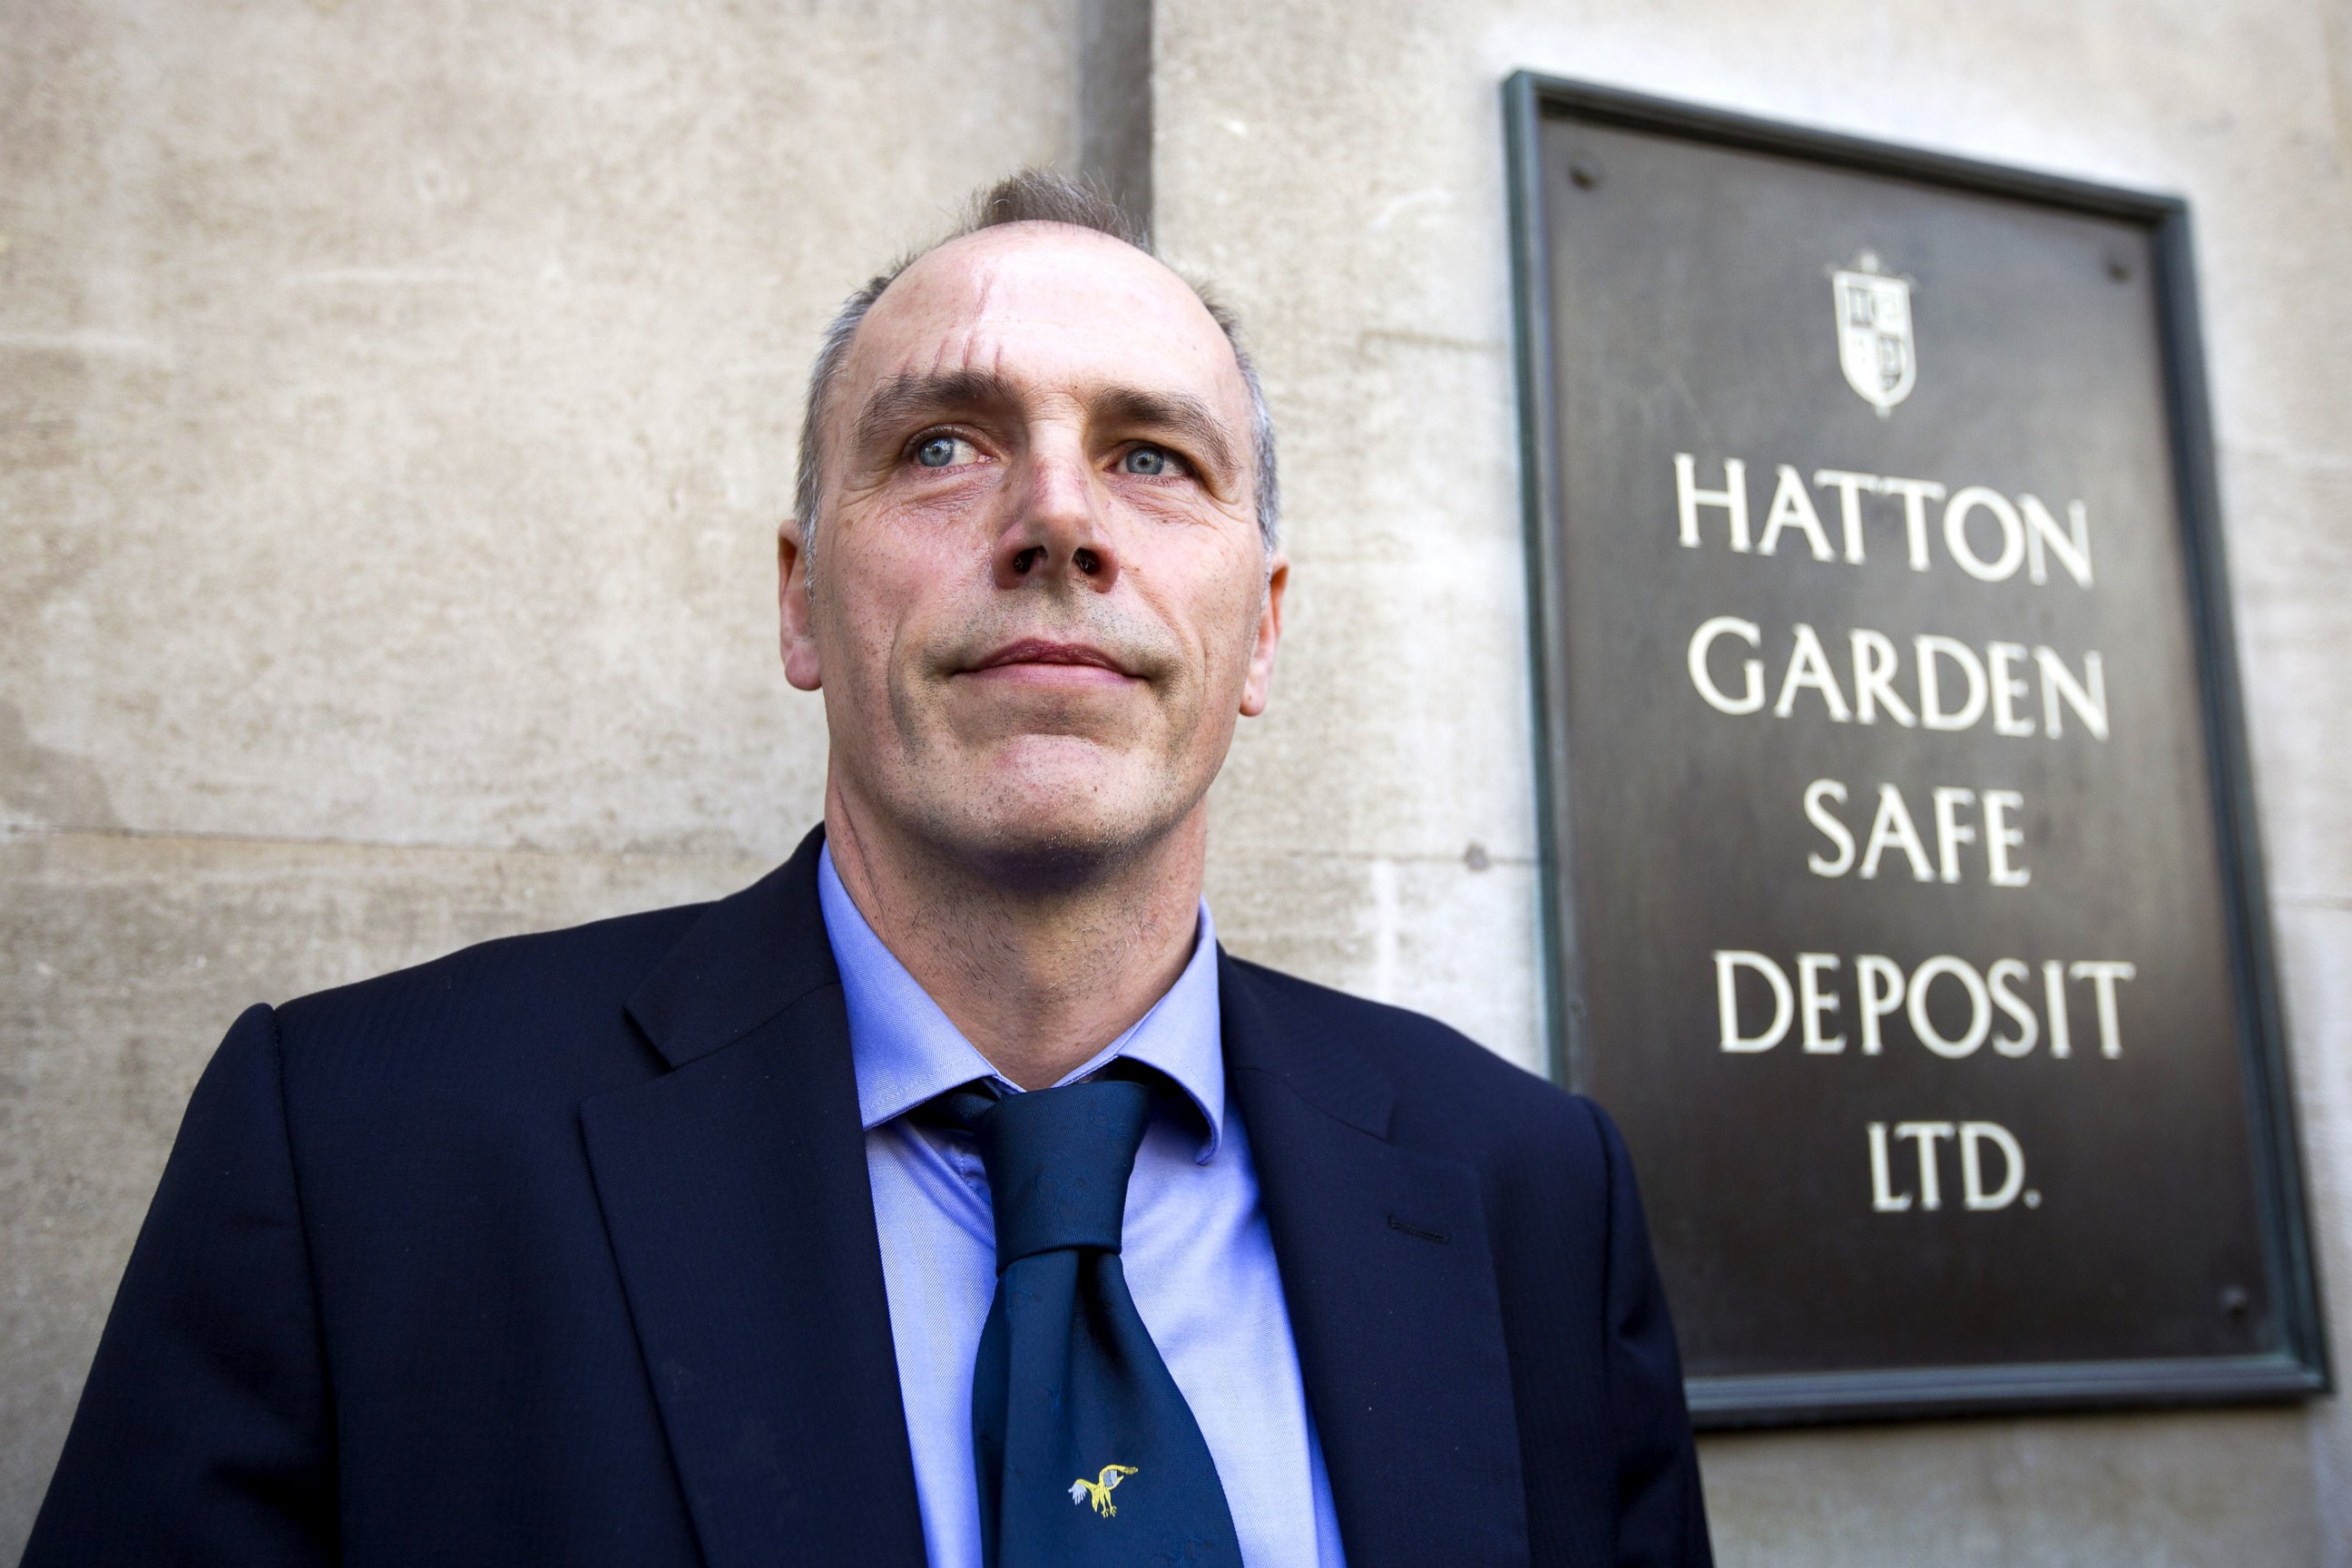 PHOTO: Detective Chief Inspector Paul Johnson of the Flying Squad, speaks to journalists outside Hatton Garden Safe Deposit Ltd following last weekend's burglary in London, April 9, 2015.